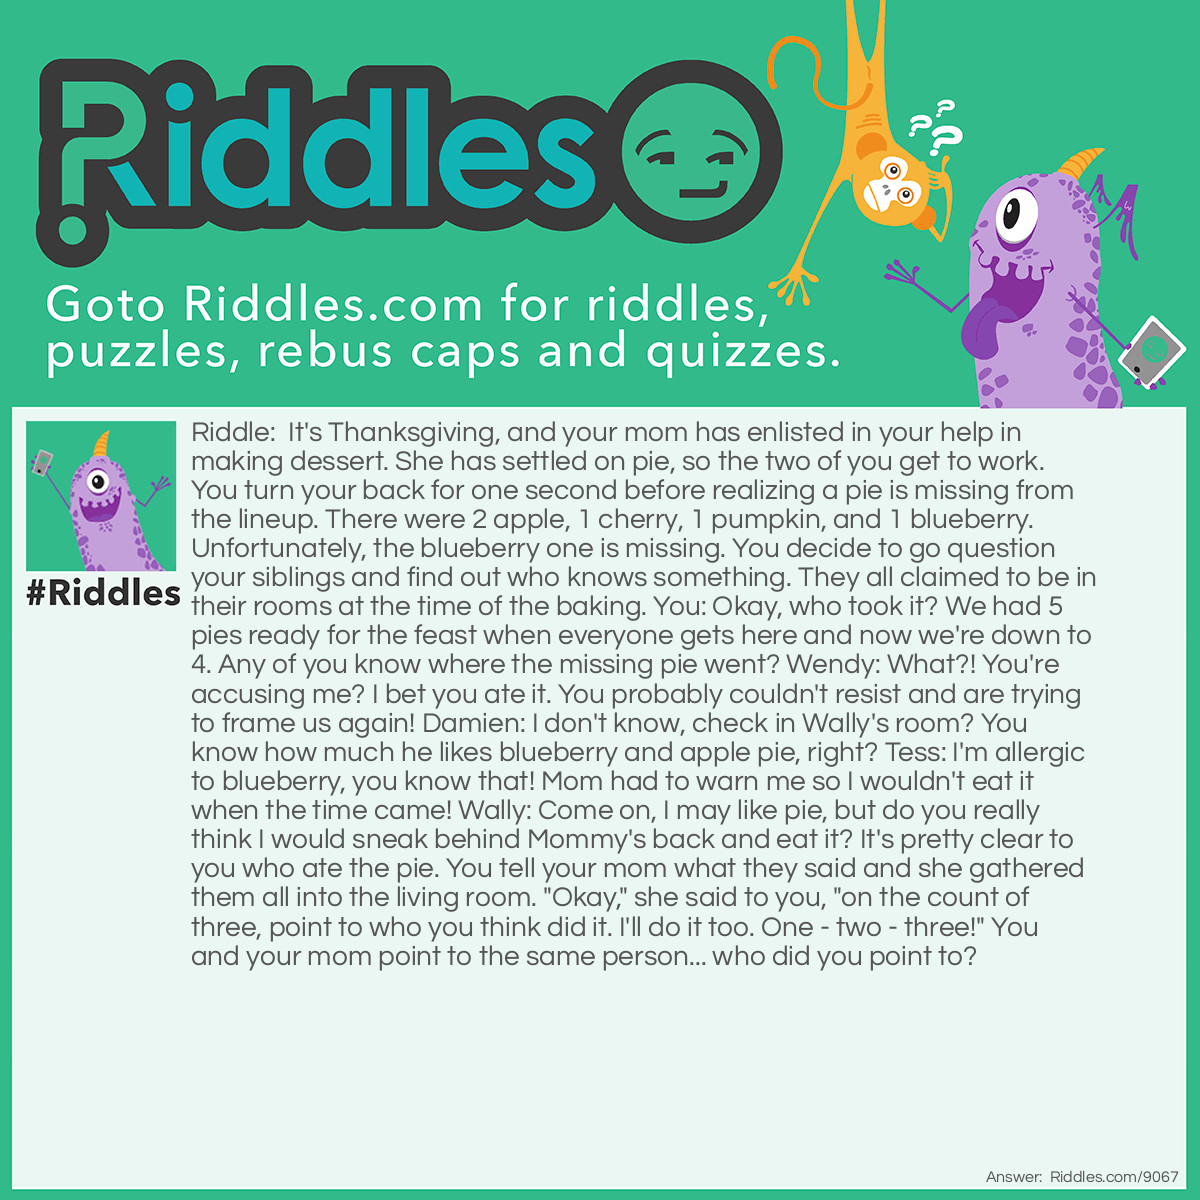 Riddle: It's <a href="https://www.riddles.com/quiz/thanksgiving-riddles"><strong>Thanksgiving</strong></a>, and your mom has enlisted your help in making dessert. She has settled on pie, so the two of you get to work. You turn your back for one second before realizing a pie is missing from the lineup. There were 2 apples, 1 cherry, 1 pumpkin, and 1 blueberry. Unfortunately, the blueberry one is missing. You decide to go question your siblings and find out who knows something. They all claimed to be in their rooms at the time of the baking. You: Okay, who took it? We had 5 pies ready for the feast when everyone gets here and now we're down to 4. Do any of you know where the missing pie went? Wendy: What?! You're accusing me? I bet you ate it. You probably couldn't resist and are trying to frame us again! Damien: I don't know, check in Wally's room? You know how much he likes blueberry and apple pie, right? Tess: I'm allergic to blueberry, you know that! Mom had to warn me so I wouldn't eat it when the time came! Wally: Come on, I may like pie, but do you really think I would sneak behind Mommy's back and eat it? It's pretty clear to you who ate the pie. You tell your mom what they said and she gathered them all into the living room. "Okay," she said to you, "on the count of three, point to who you think did it. I'll do it too. One - two - three!" You and your mom point to the same person... who did you point to? Answer: Damien. You may think it's Tess, but she would know about the flavor because your mom told her. But how would Damien know about it?